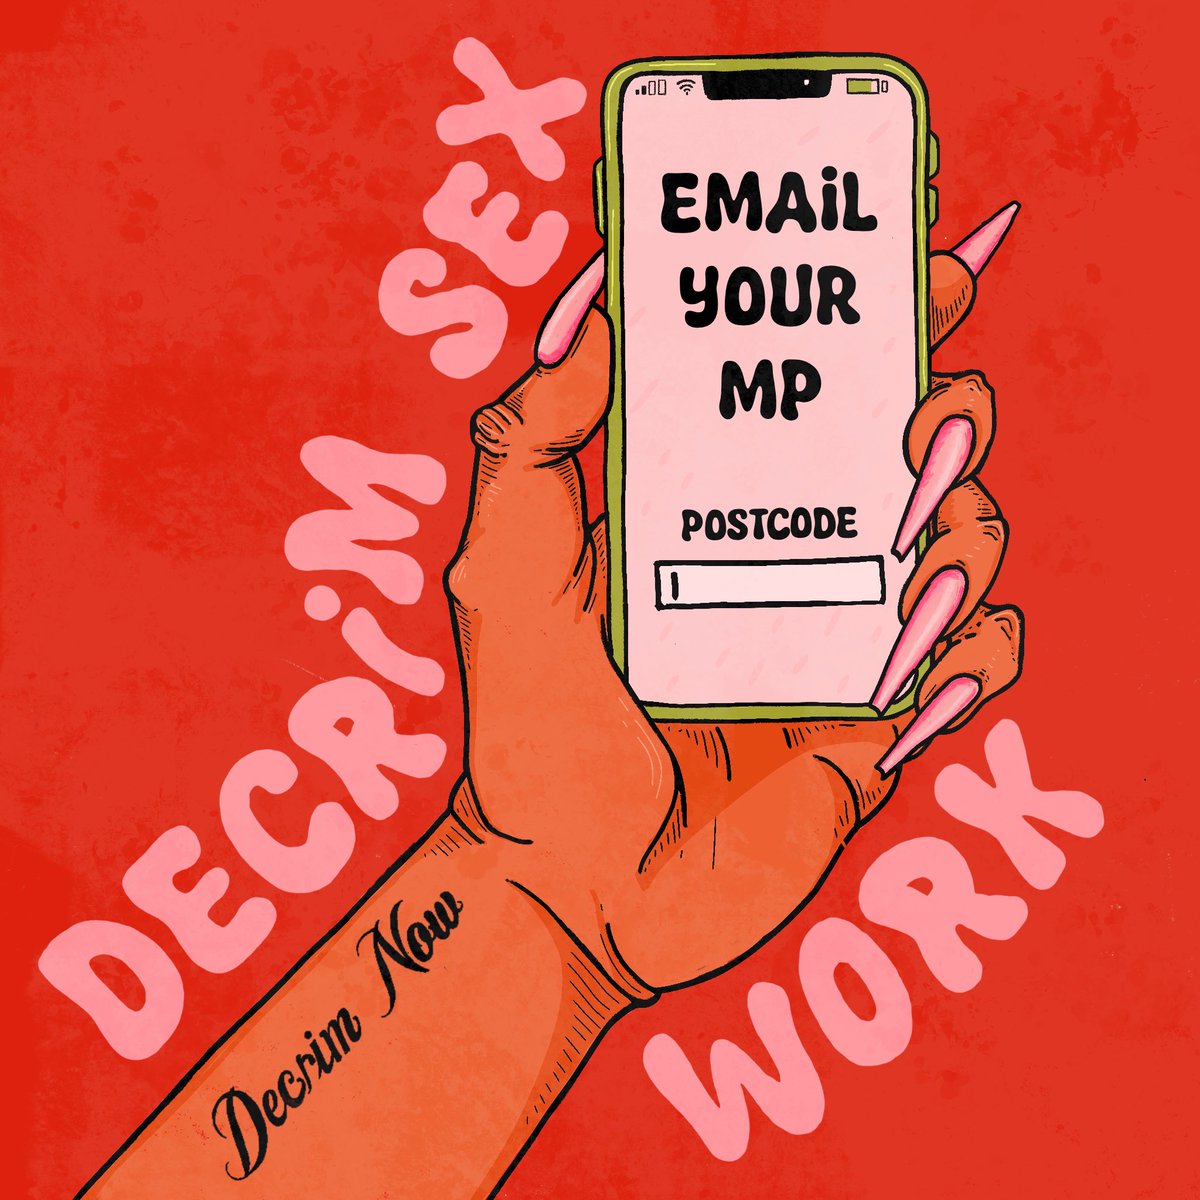 The criminalisation of sex work puts sex workers in danger. It is against the law for sex workers in the U.K. to work together for safety. Sex workers need decriminalisation & we need it now. Use our tool to email your MP and demand full decrim. decrim-email.netlify.app